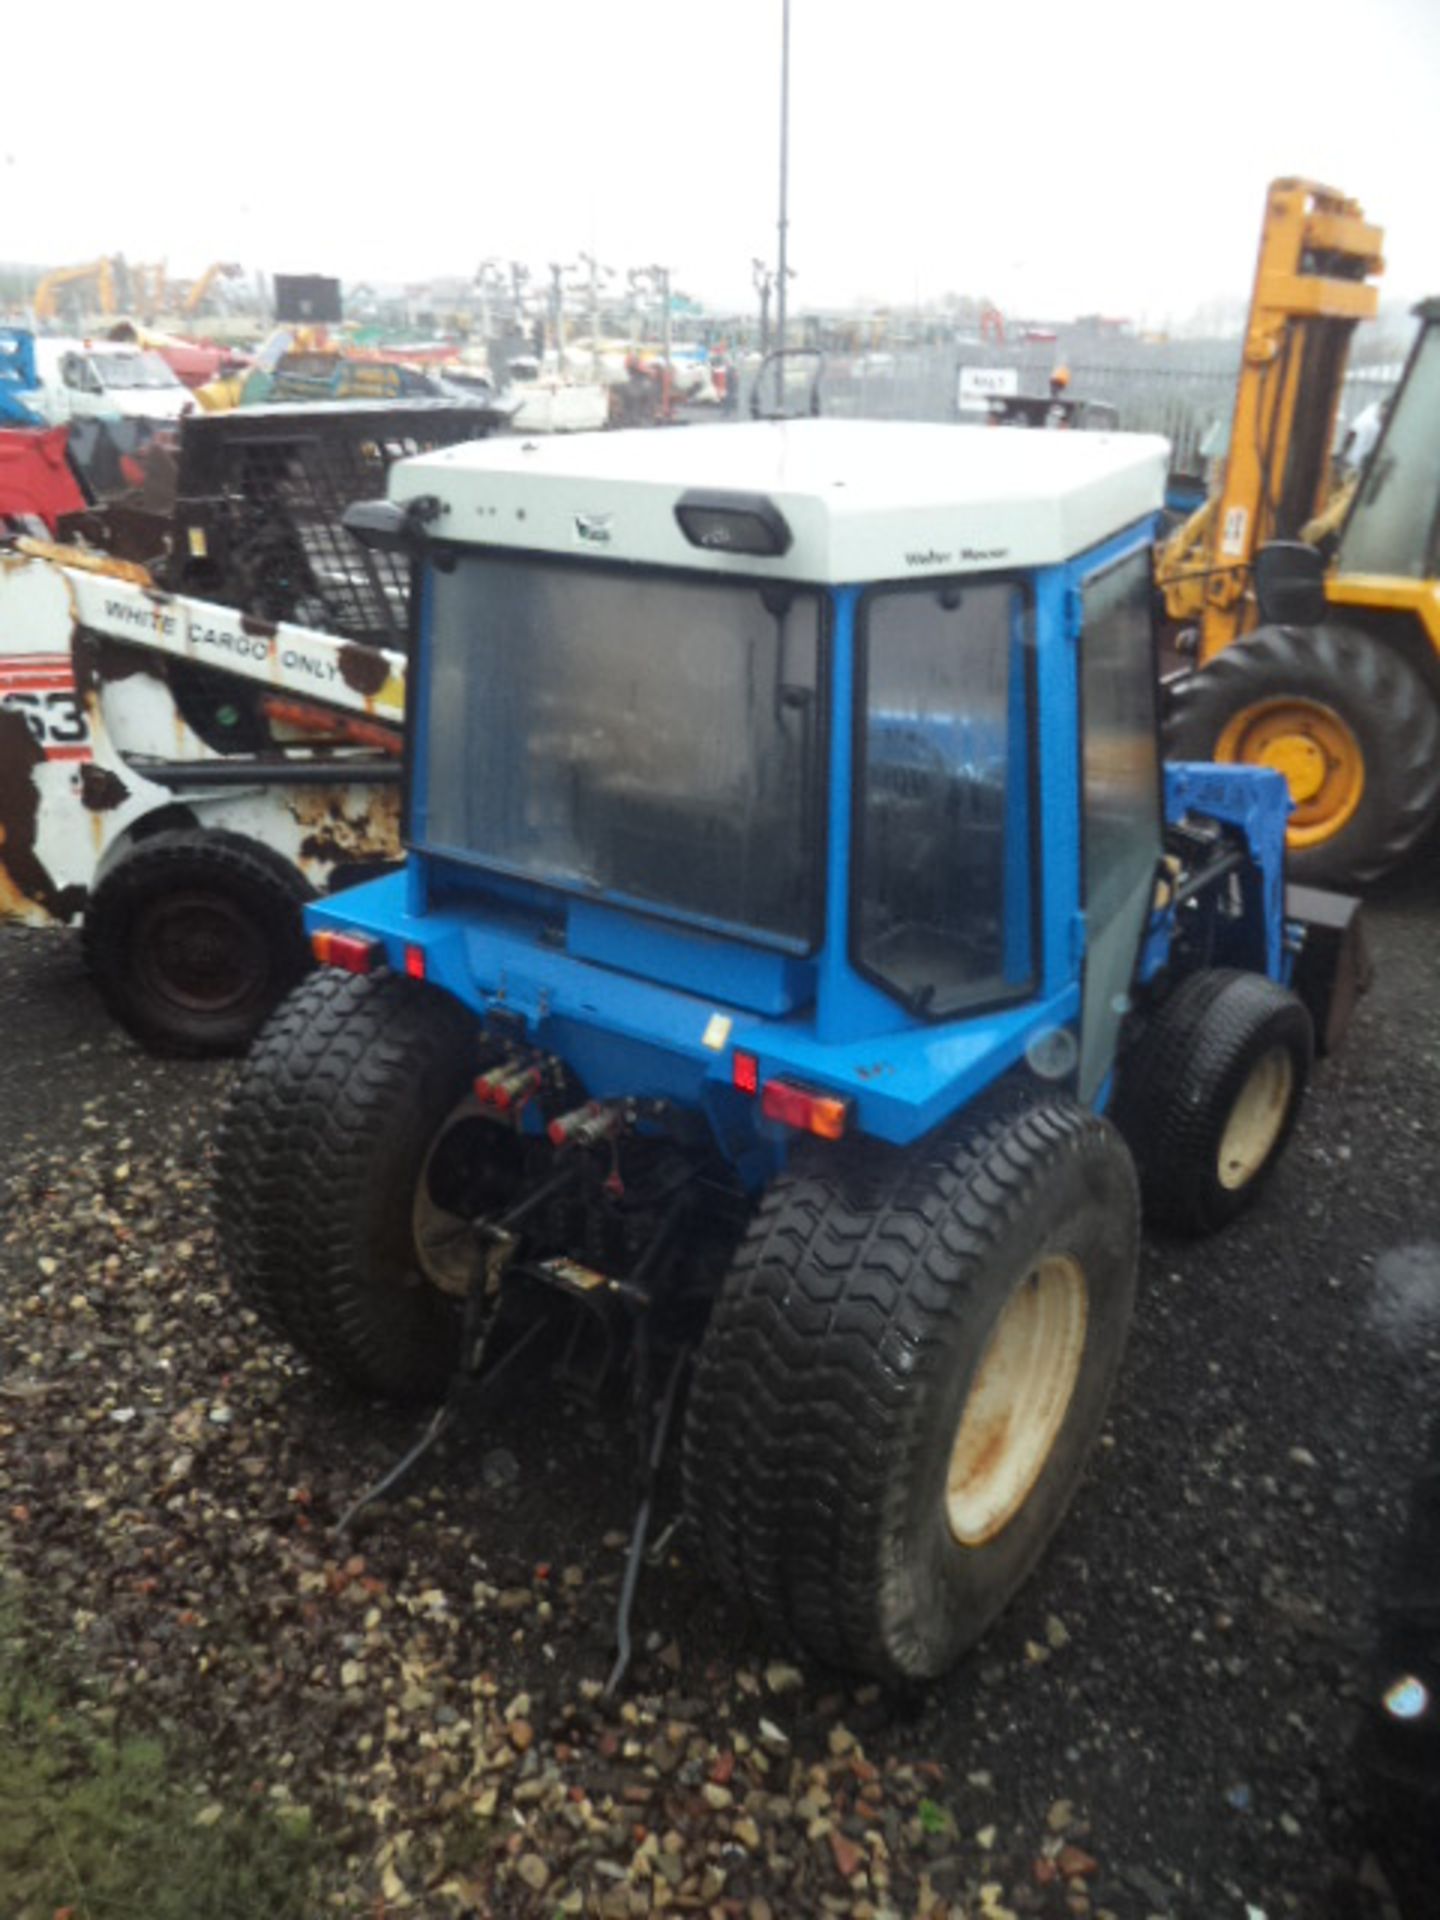 ISEKI TK538 4wd compact tractor c/w full cab & front loader & bucket, 3220 recorded hrs (R&D) - Image 3 of 3